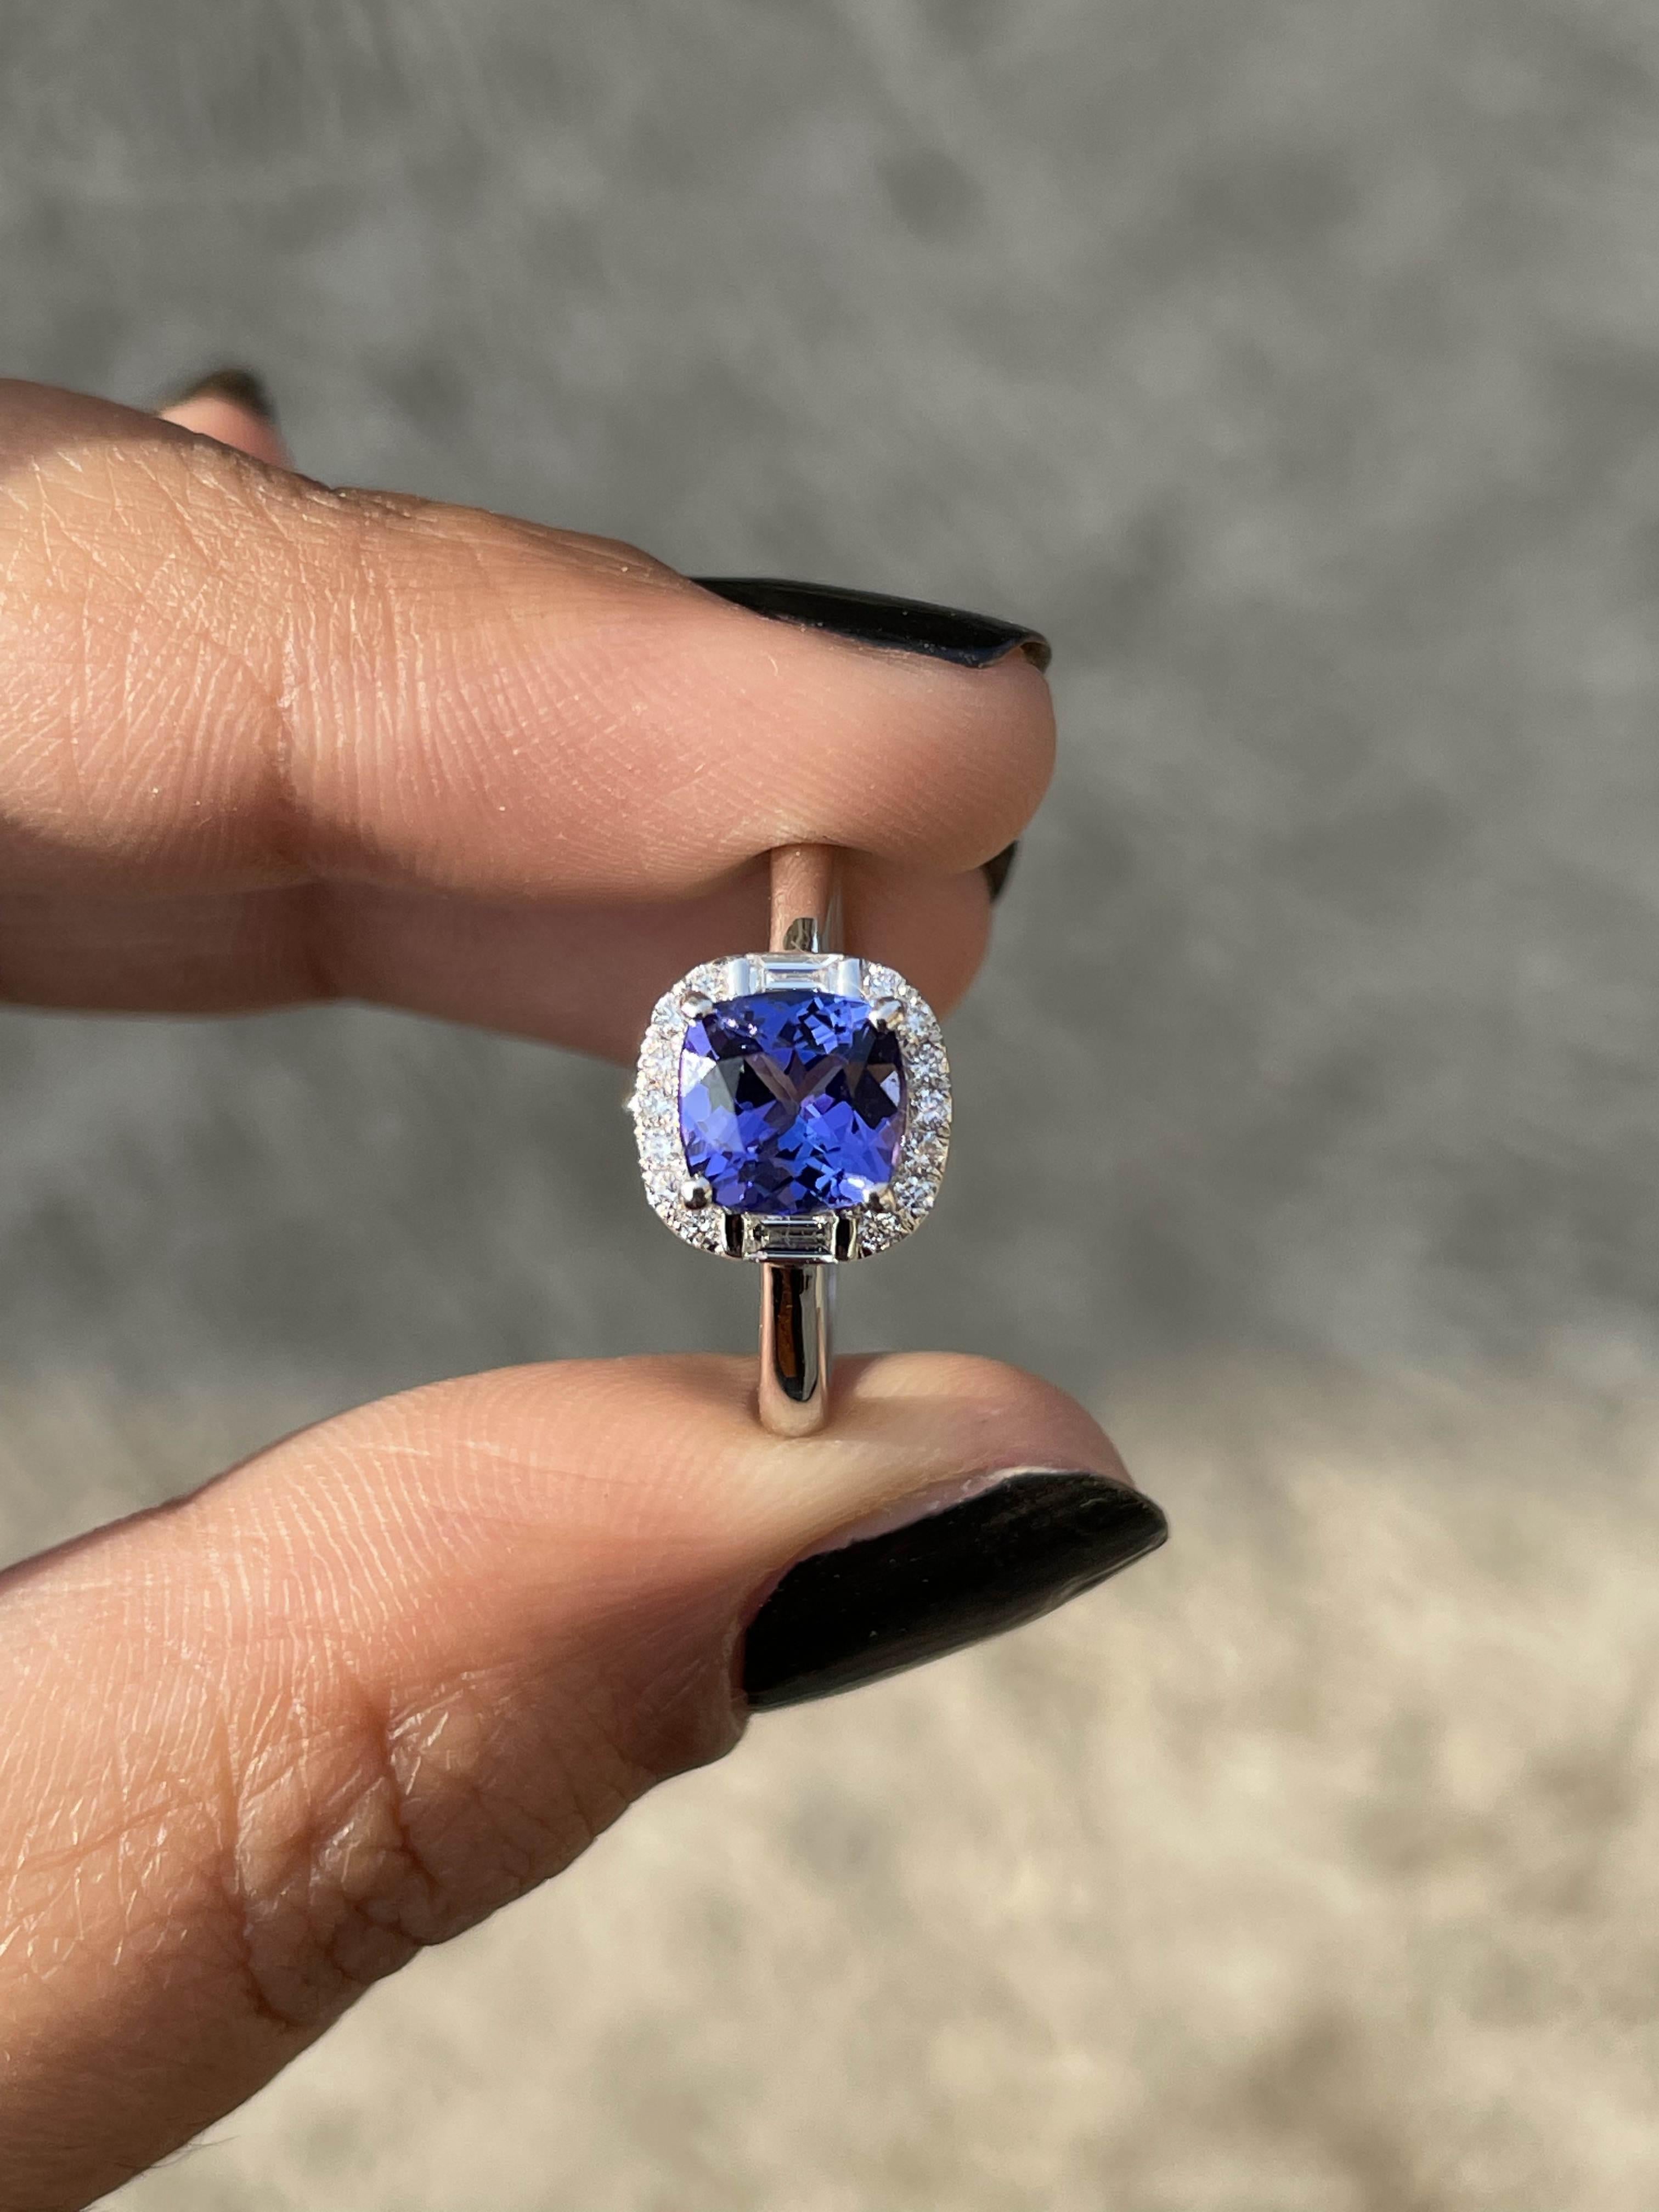 For Sale:  18k Solid White Gold Cushion Cut Tanzanite and Diamond Ring 6